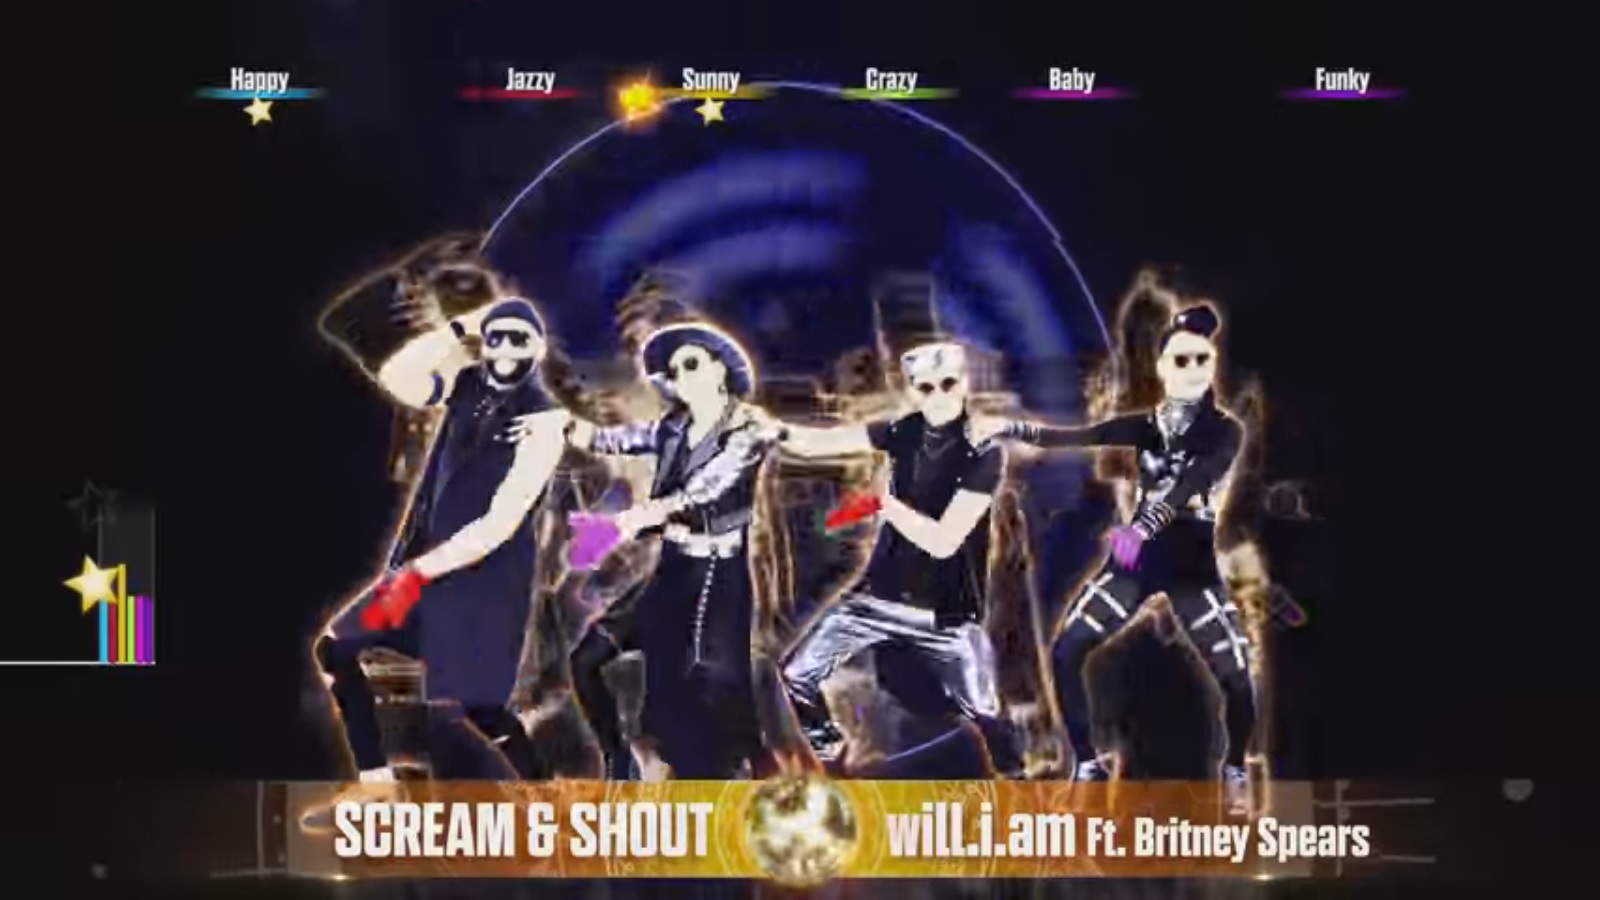 Just dance scream and shout